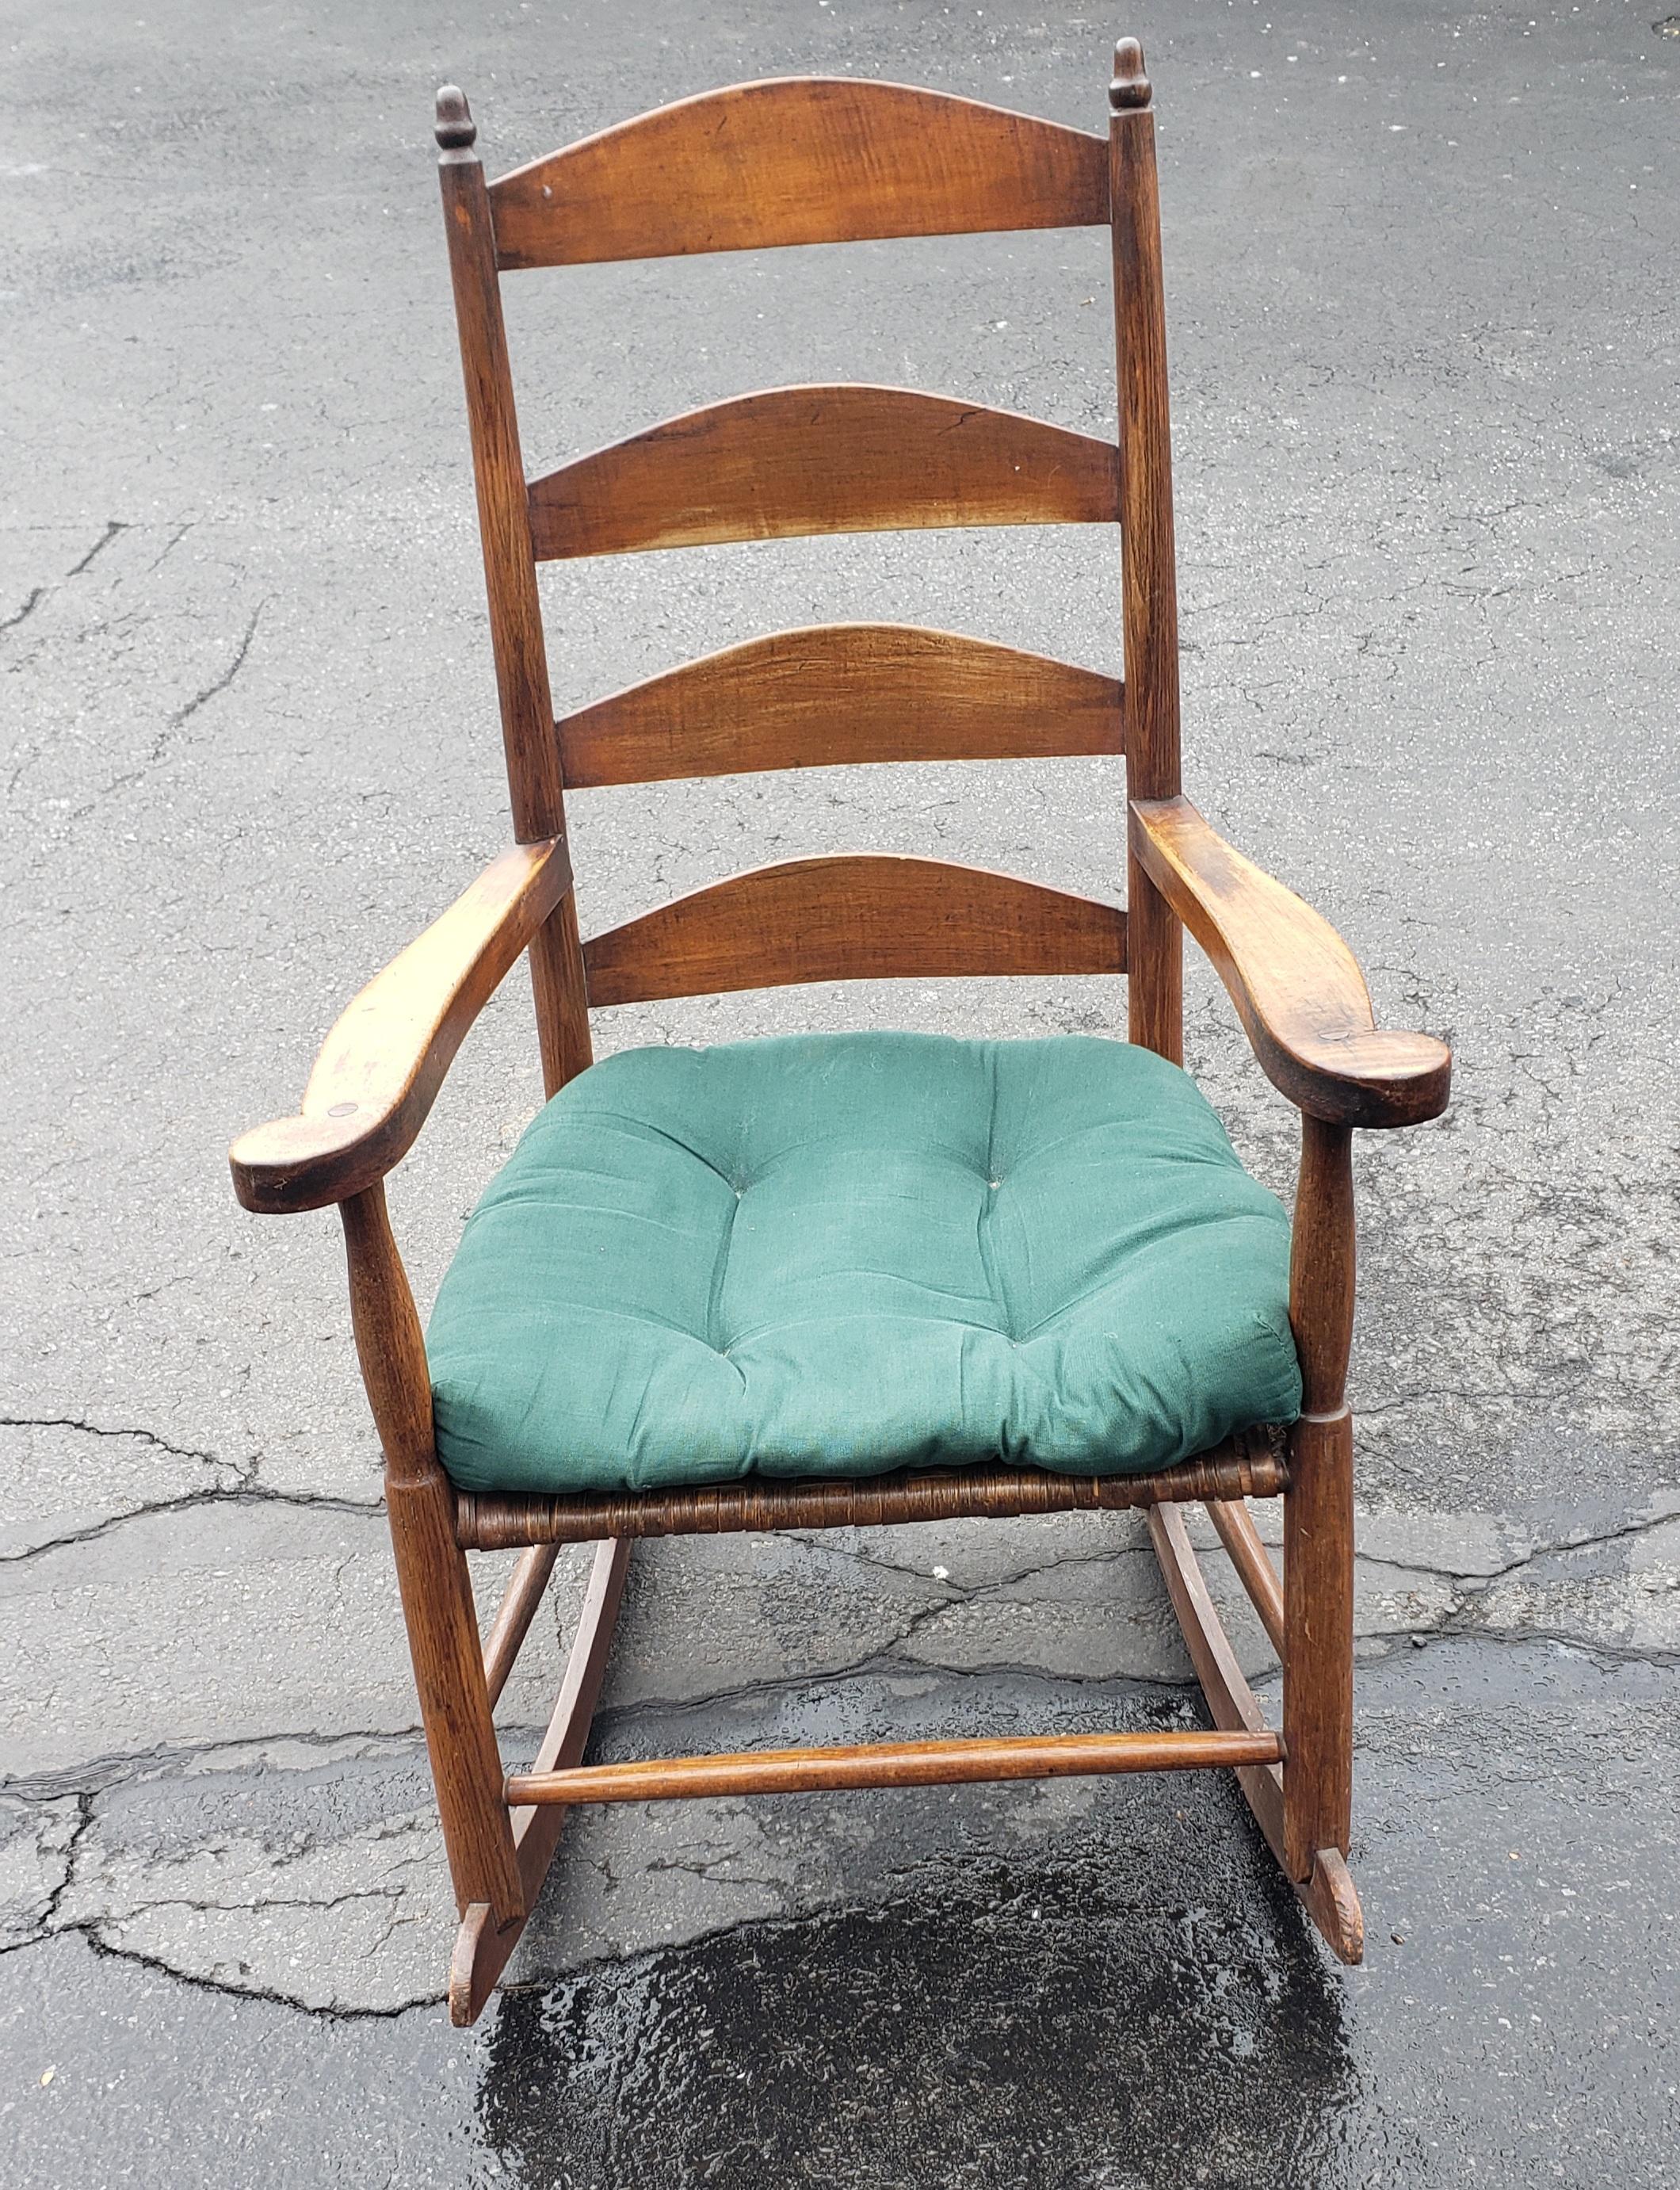 Native American Early American Walnut Ladder Back Rocking Chair w/ Double Sided Split Reed Seat For Sale